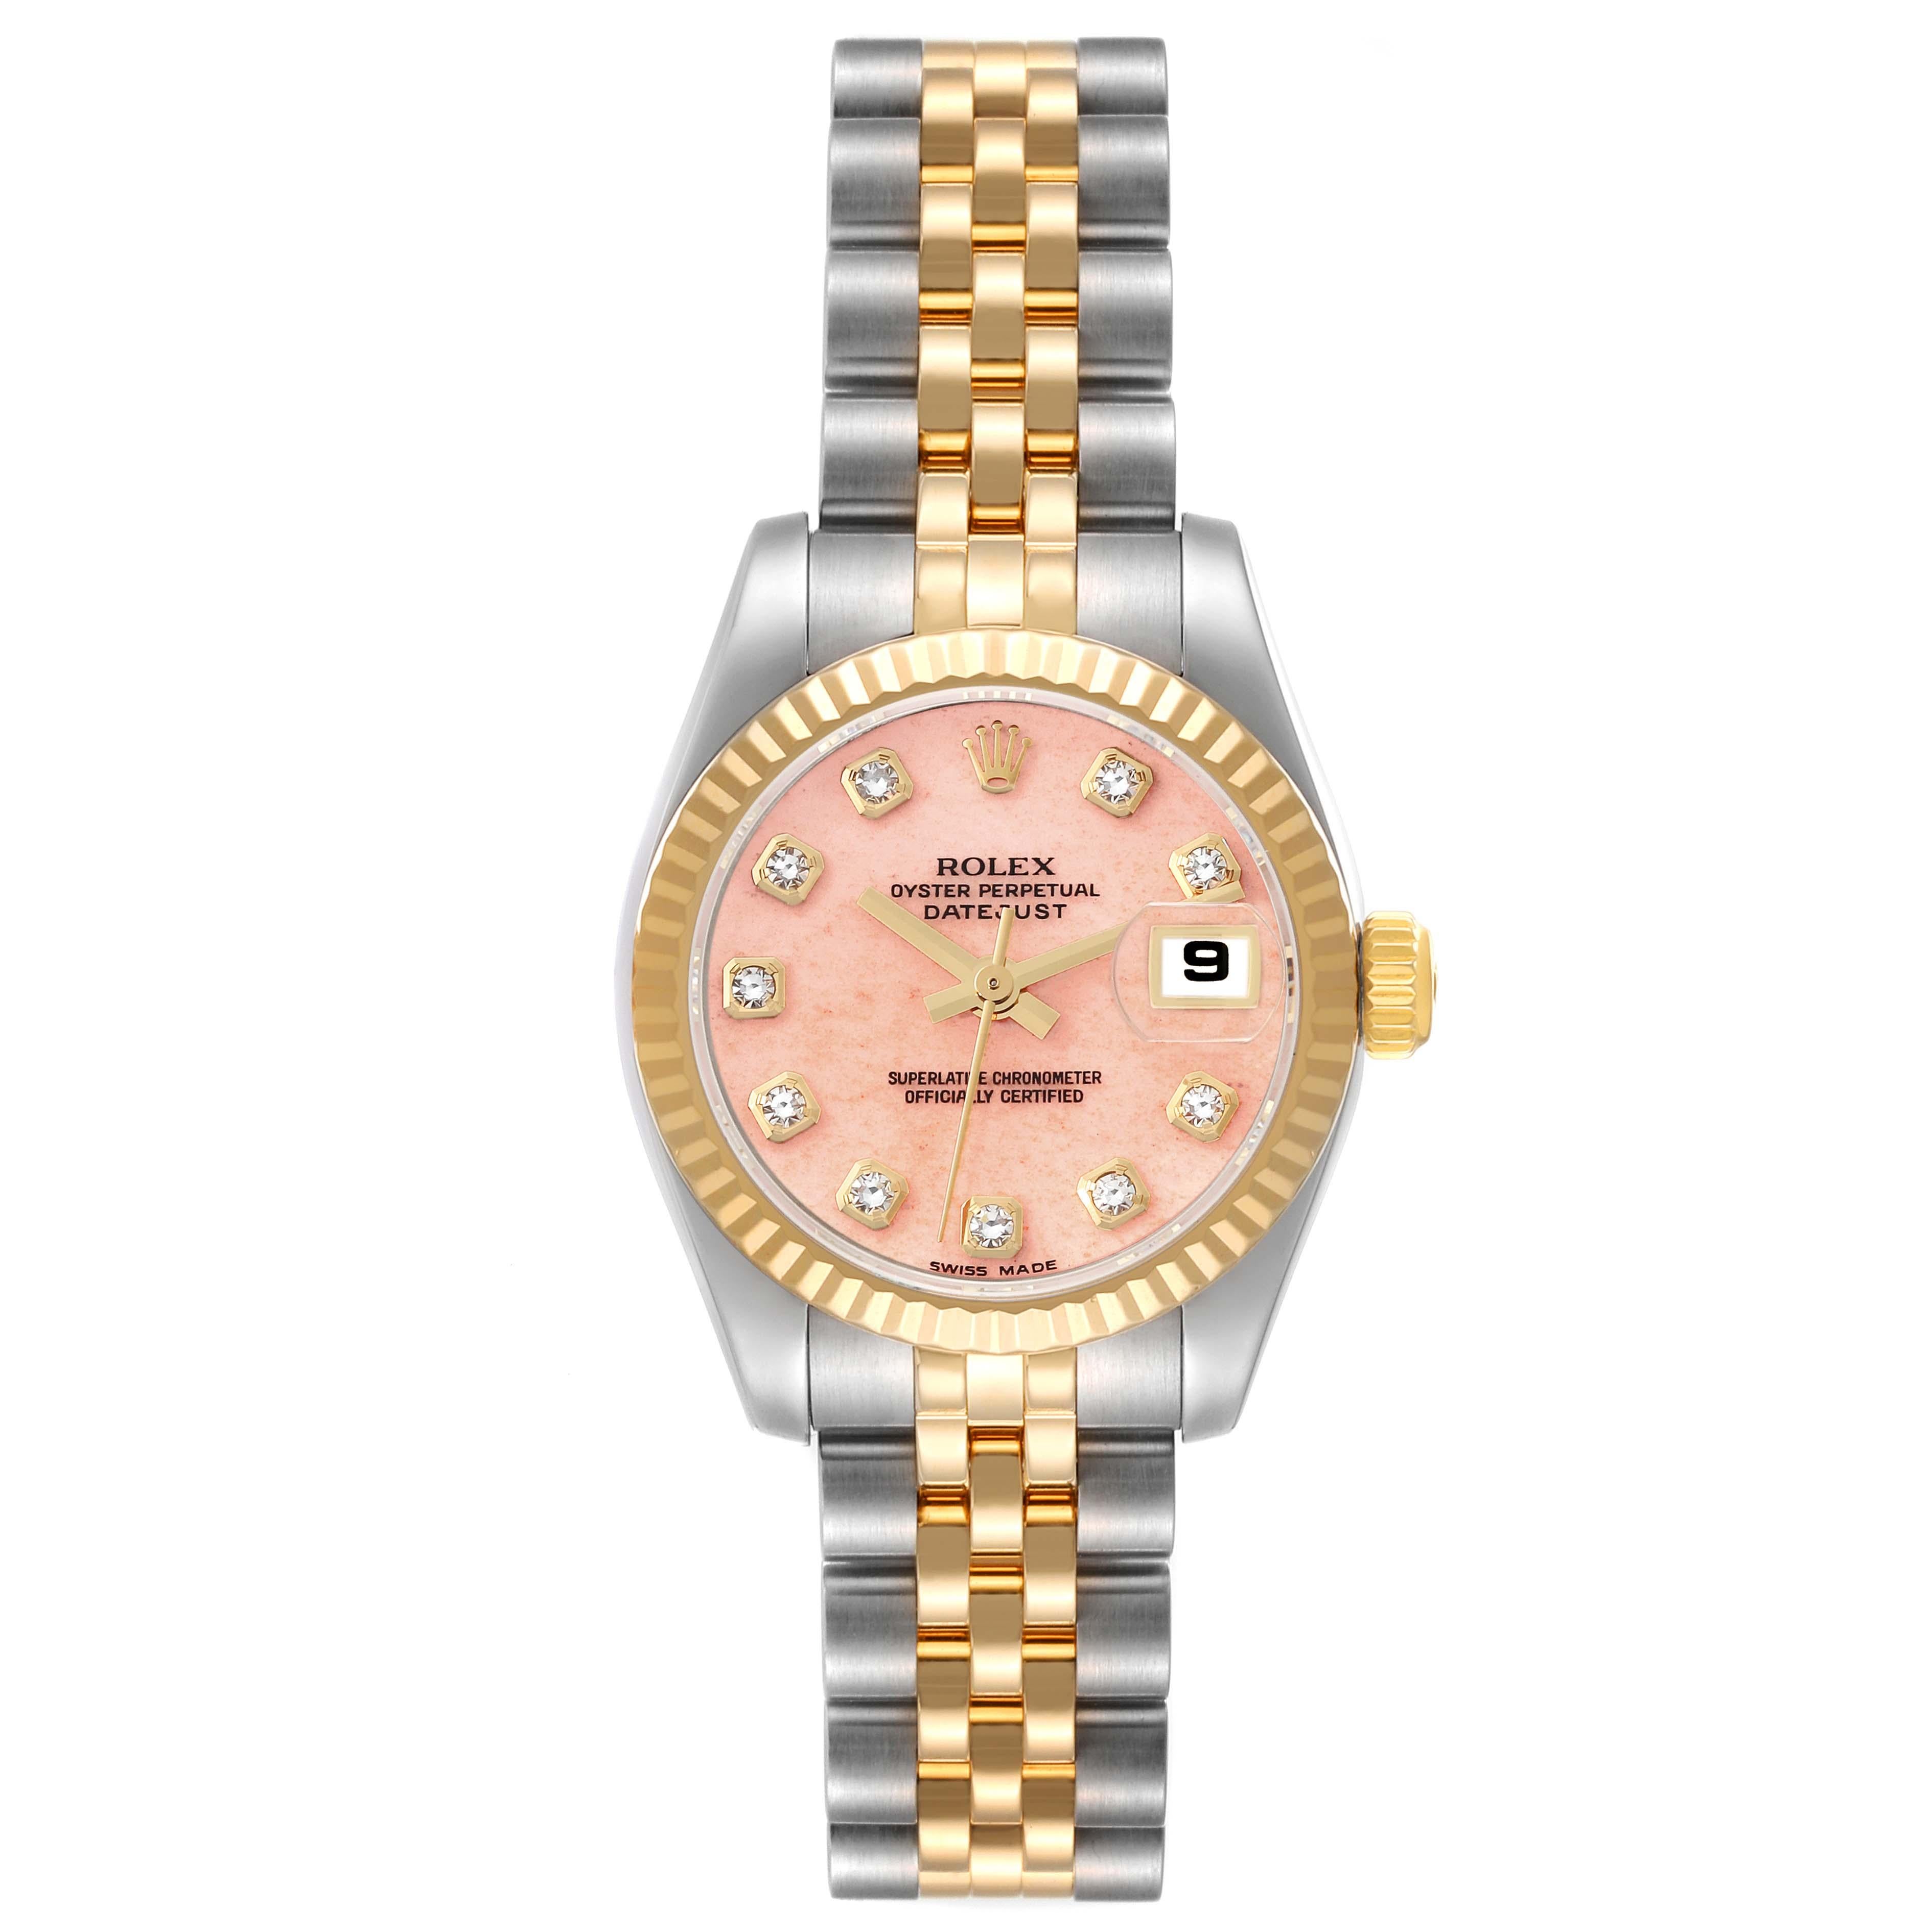 Rolex Datejust Steel Yellow Gold Coral Diamond Dial Ladies Watch 179173. Officially certified chronometer self-winding movement. Stainless steel oyster case 26 mm in diameter. Rolex logo on a 18K yellow gold crown. 18k yellow gold fluted bezel.